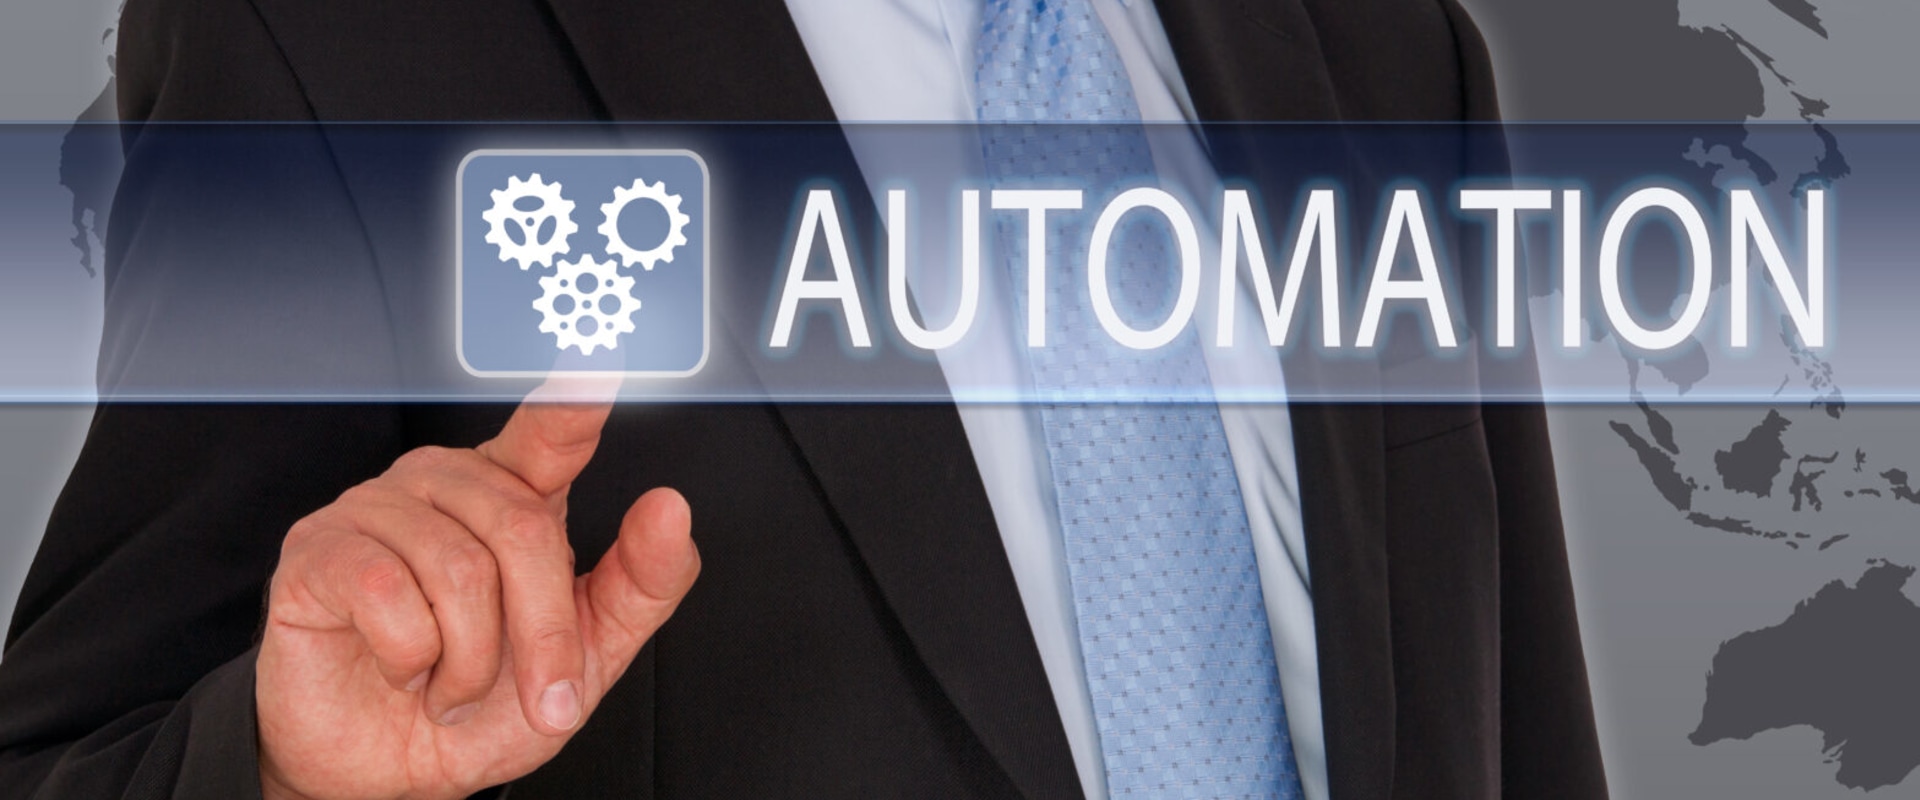 What is automated customer experience?